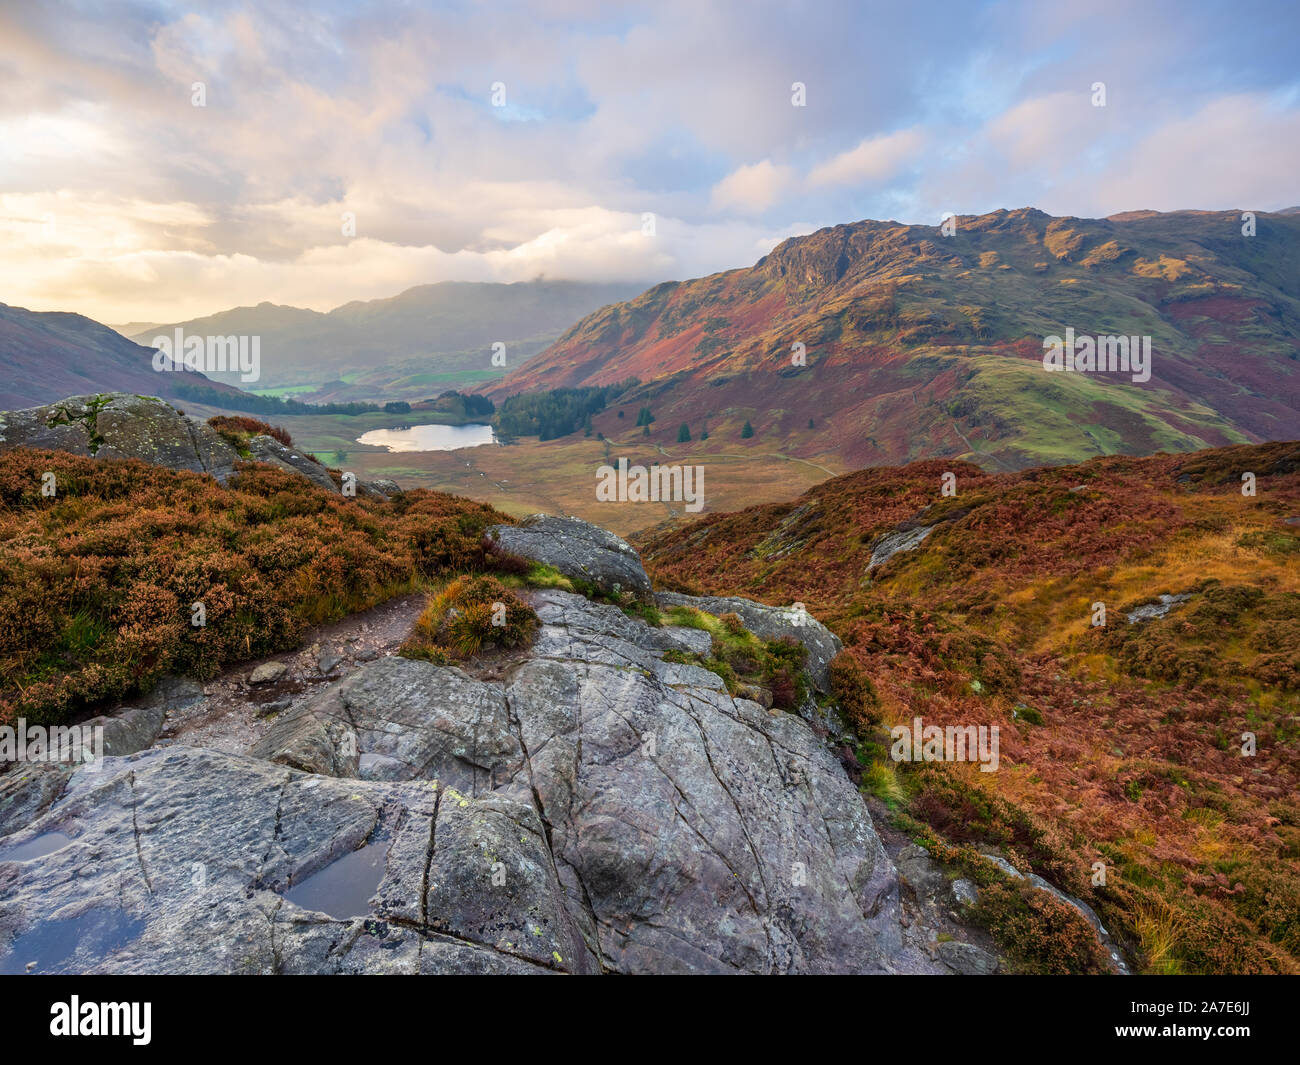 Blea Tarn is visible beneath the imposing slopes of Wrynose Fell during the golden hour of an autmn morning on Side Pike in The Lake District. Stock Photo